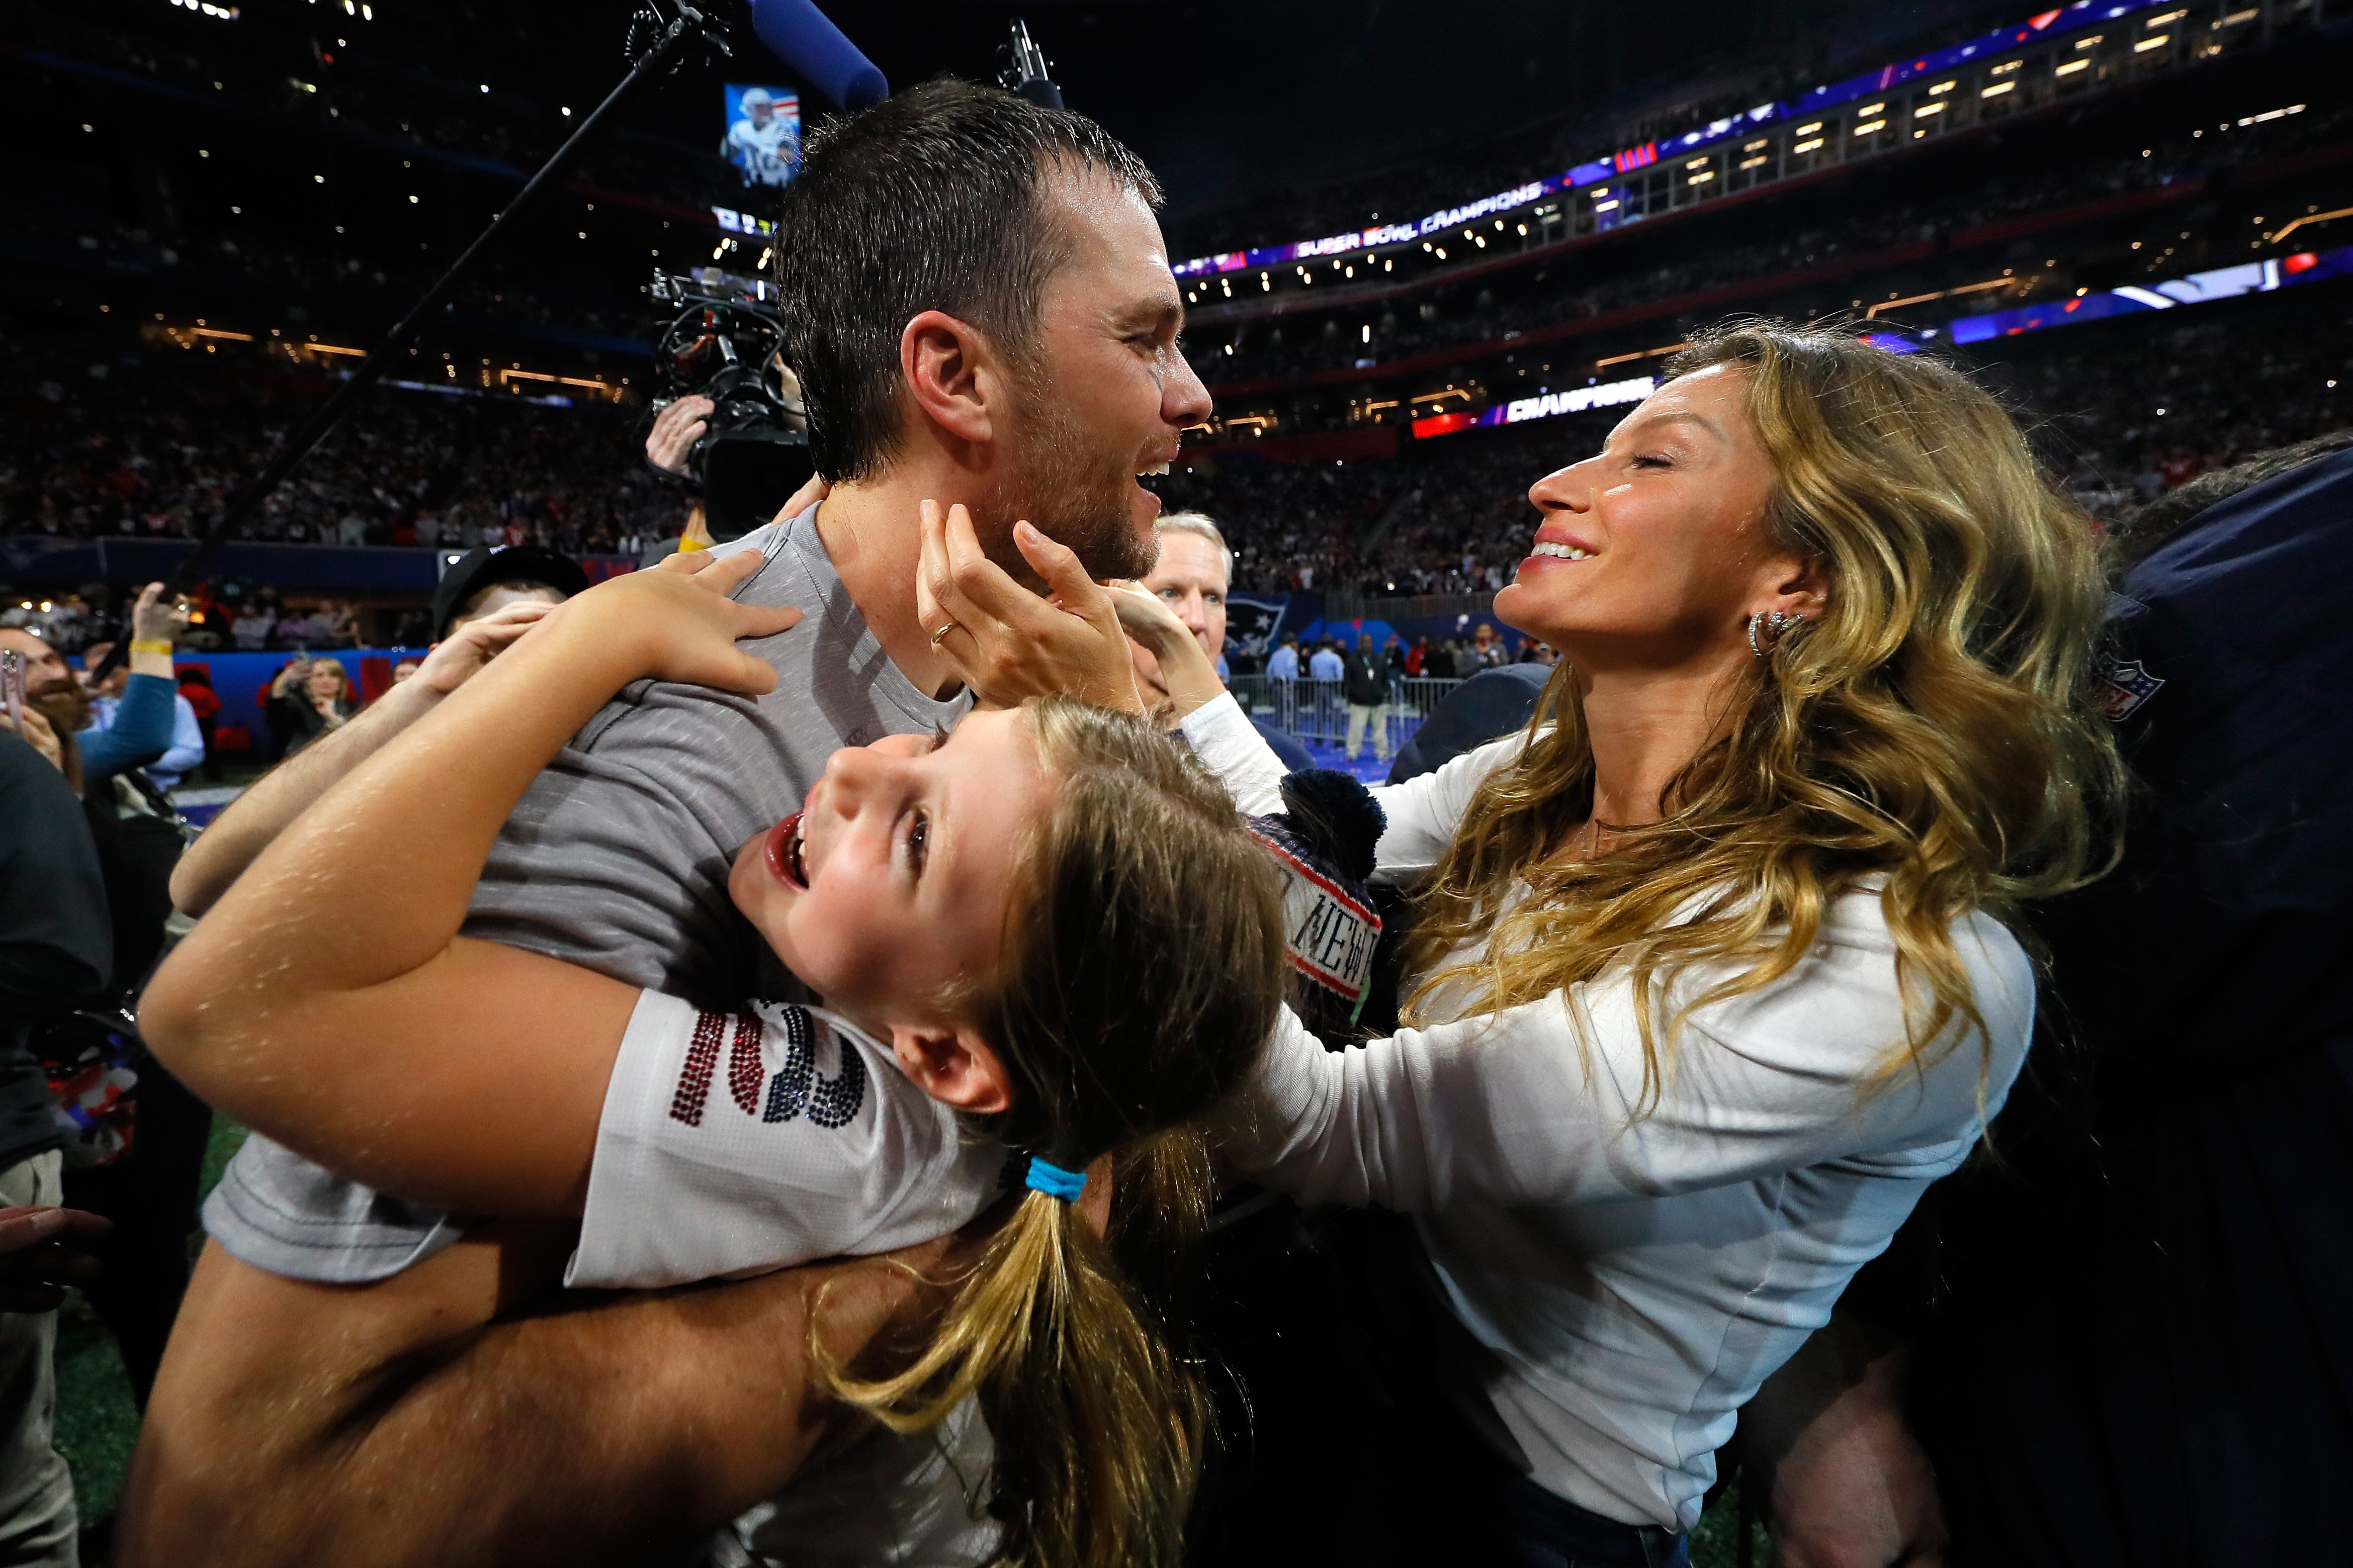 Tom Brady celebrates with family after Super Bowl win